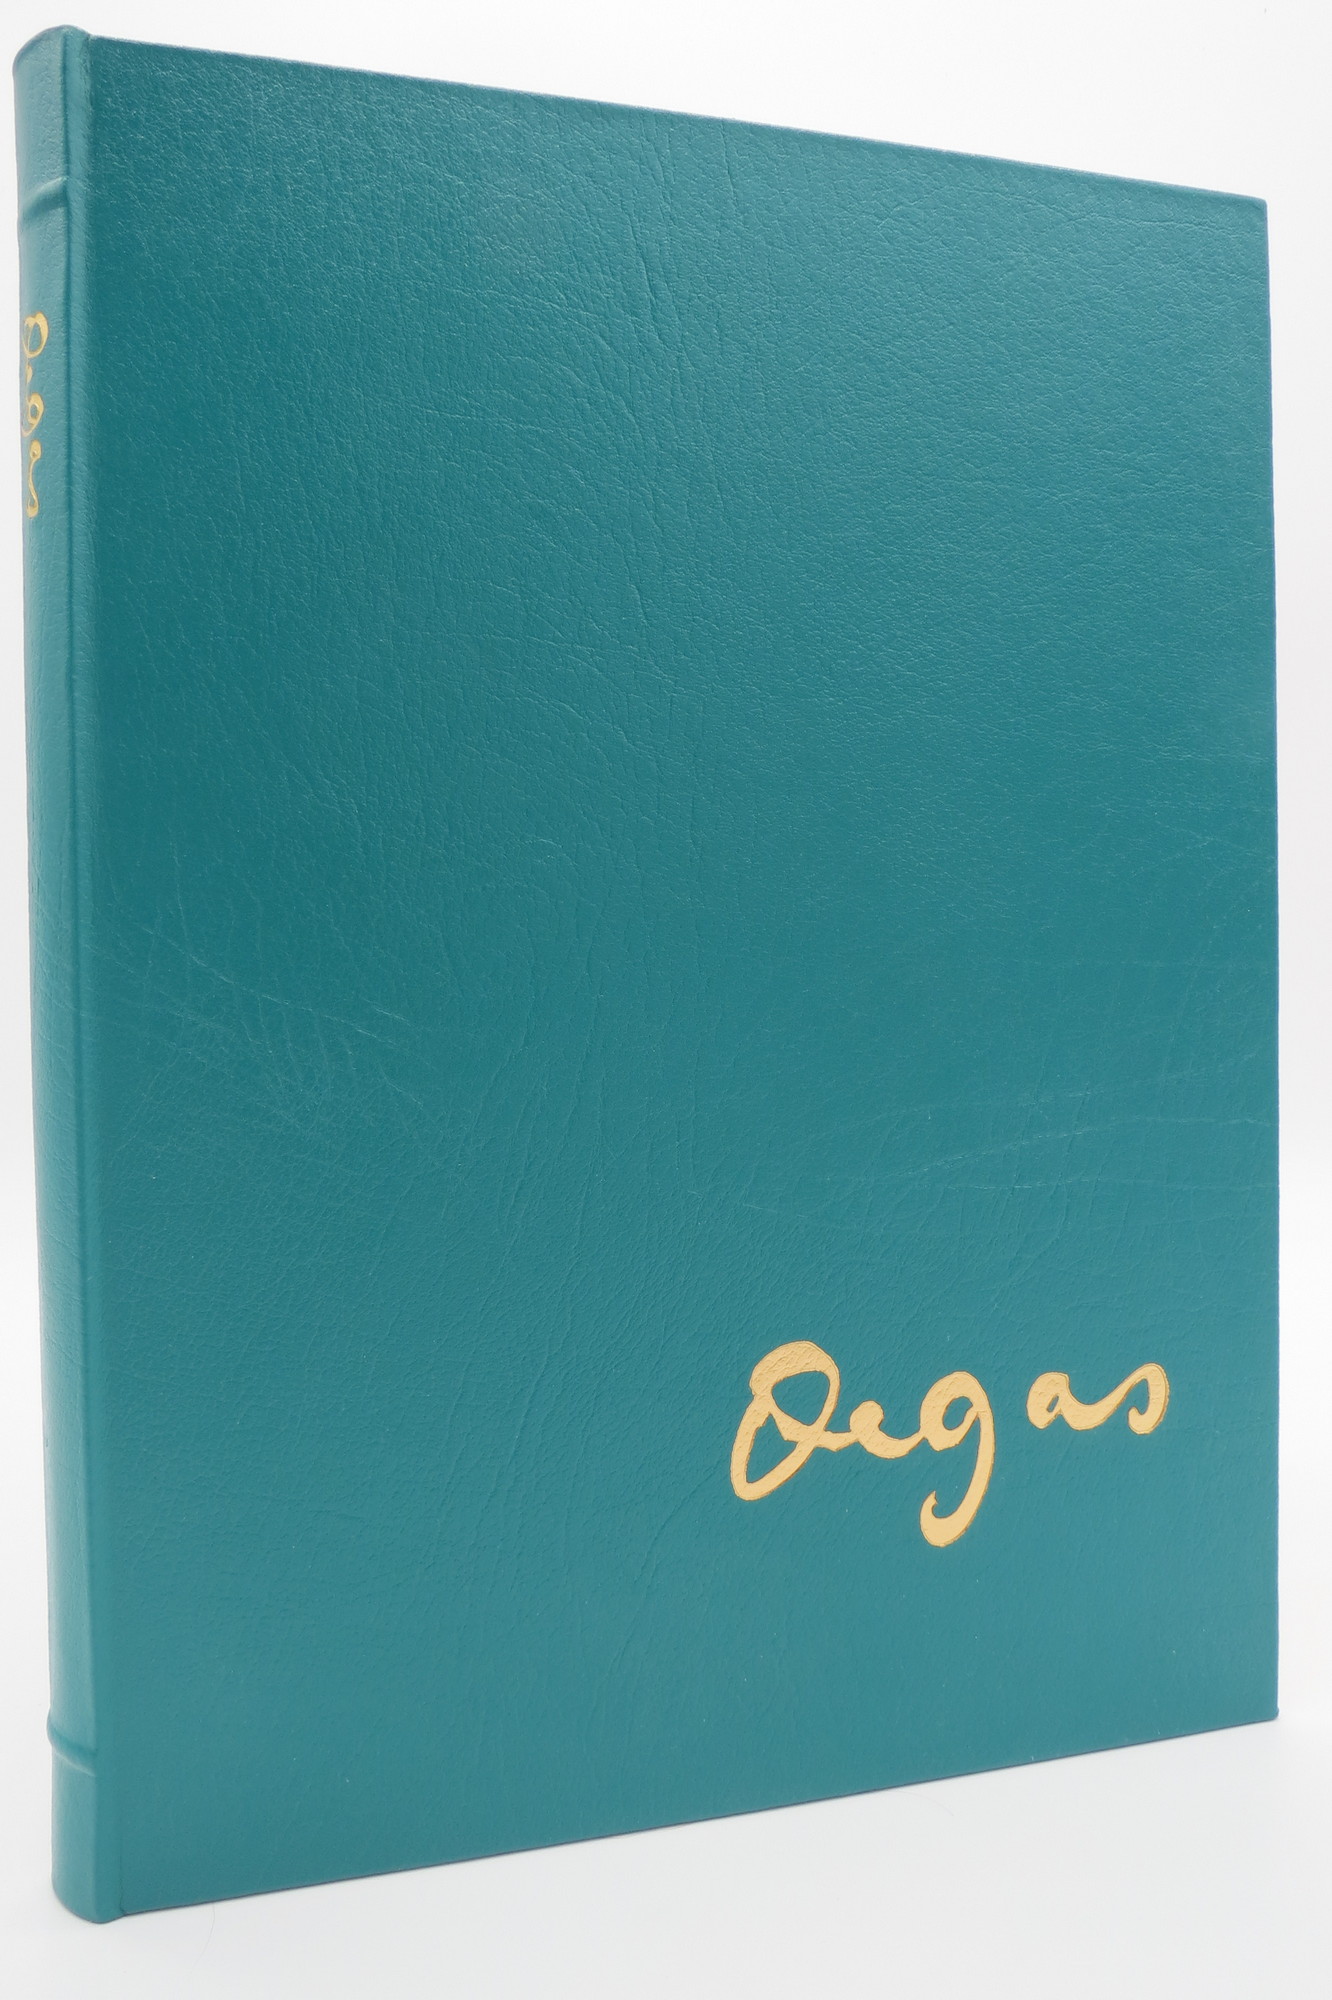 Image for DEGAS (GREAT ART AND ARTISTS)  (Leather Bound) Edgar-Hilaire-Germain Degas by Daniel Catton Rich Leather Bound (Provenance: Israeli Artist Avraham Loewenthal)